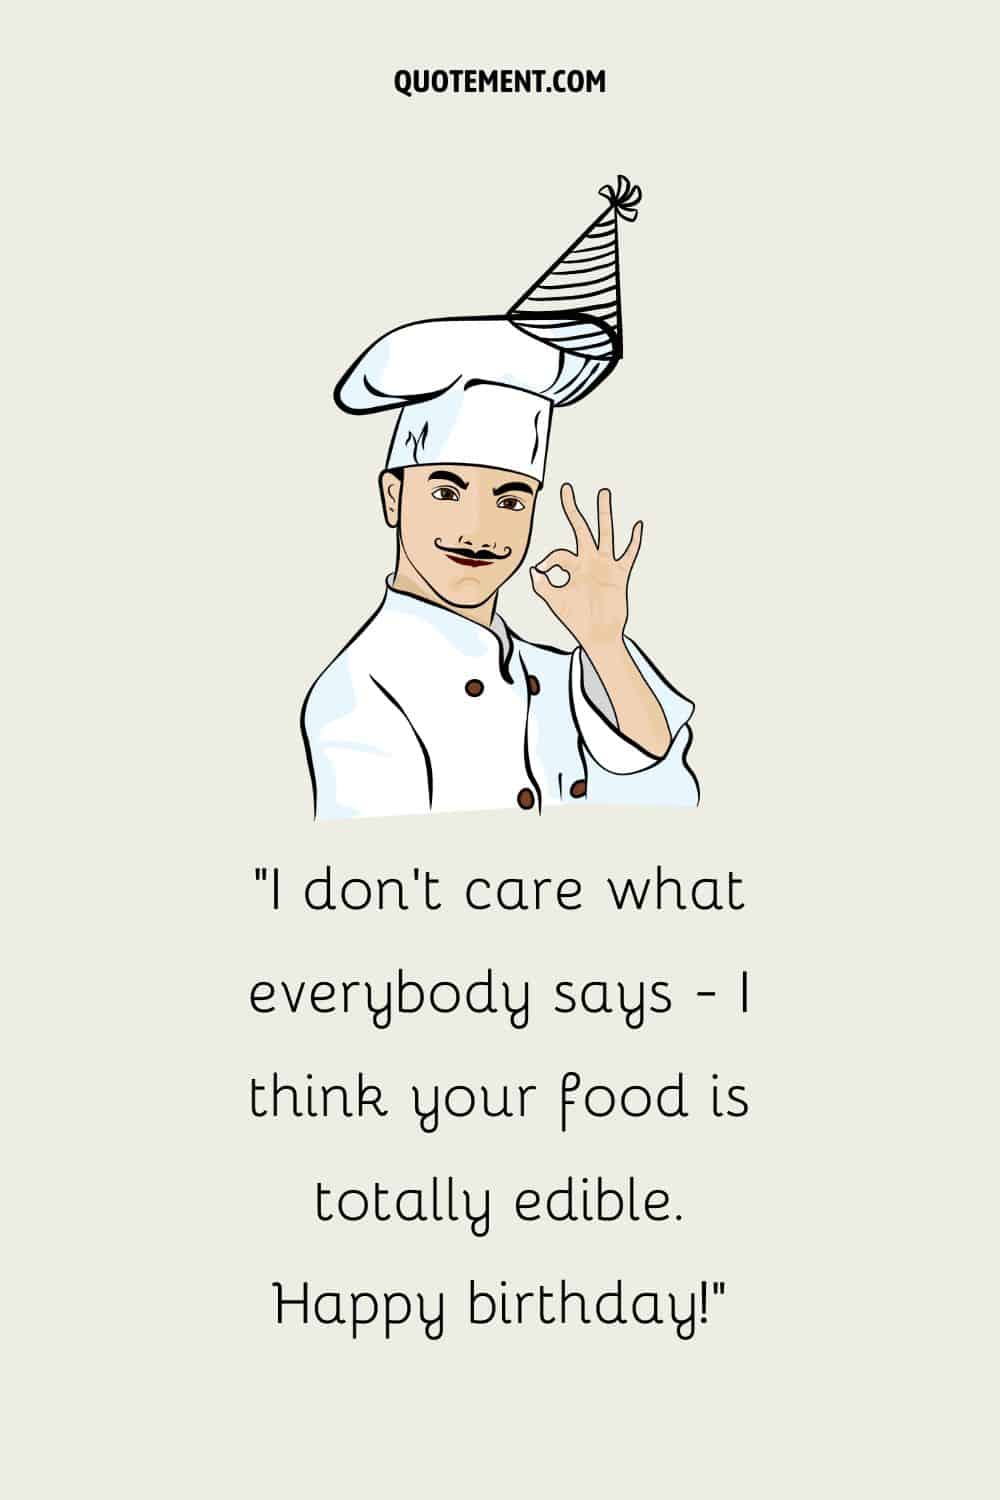 Chef with a hat illustration representing a funny birthday wish.
